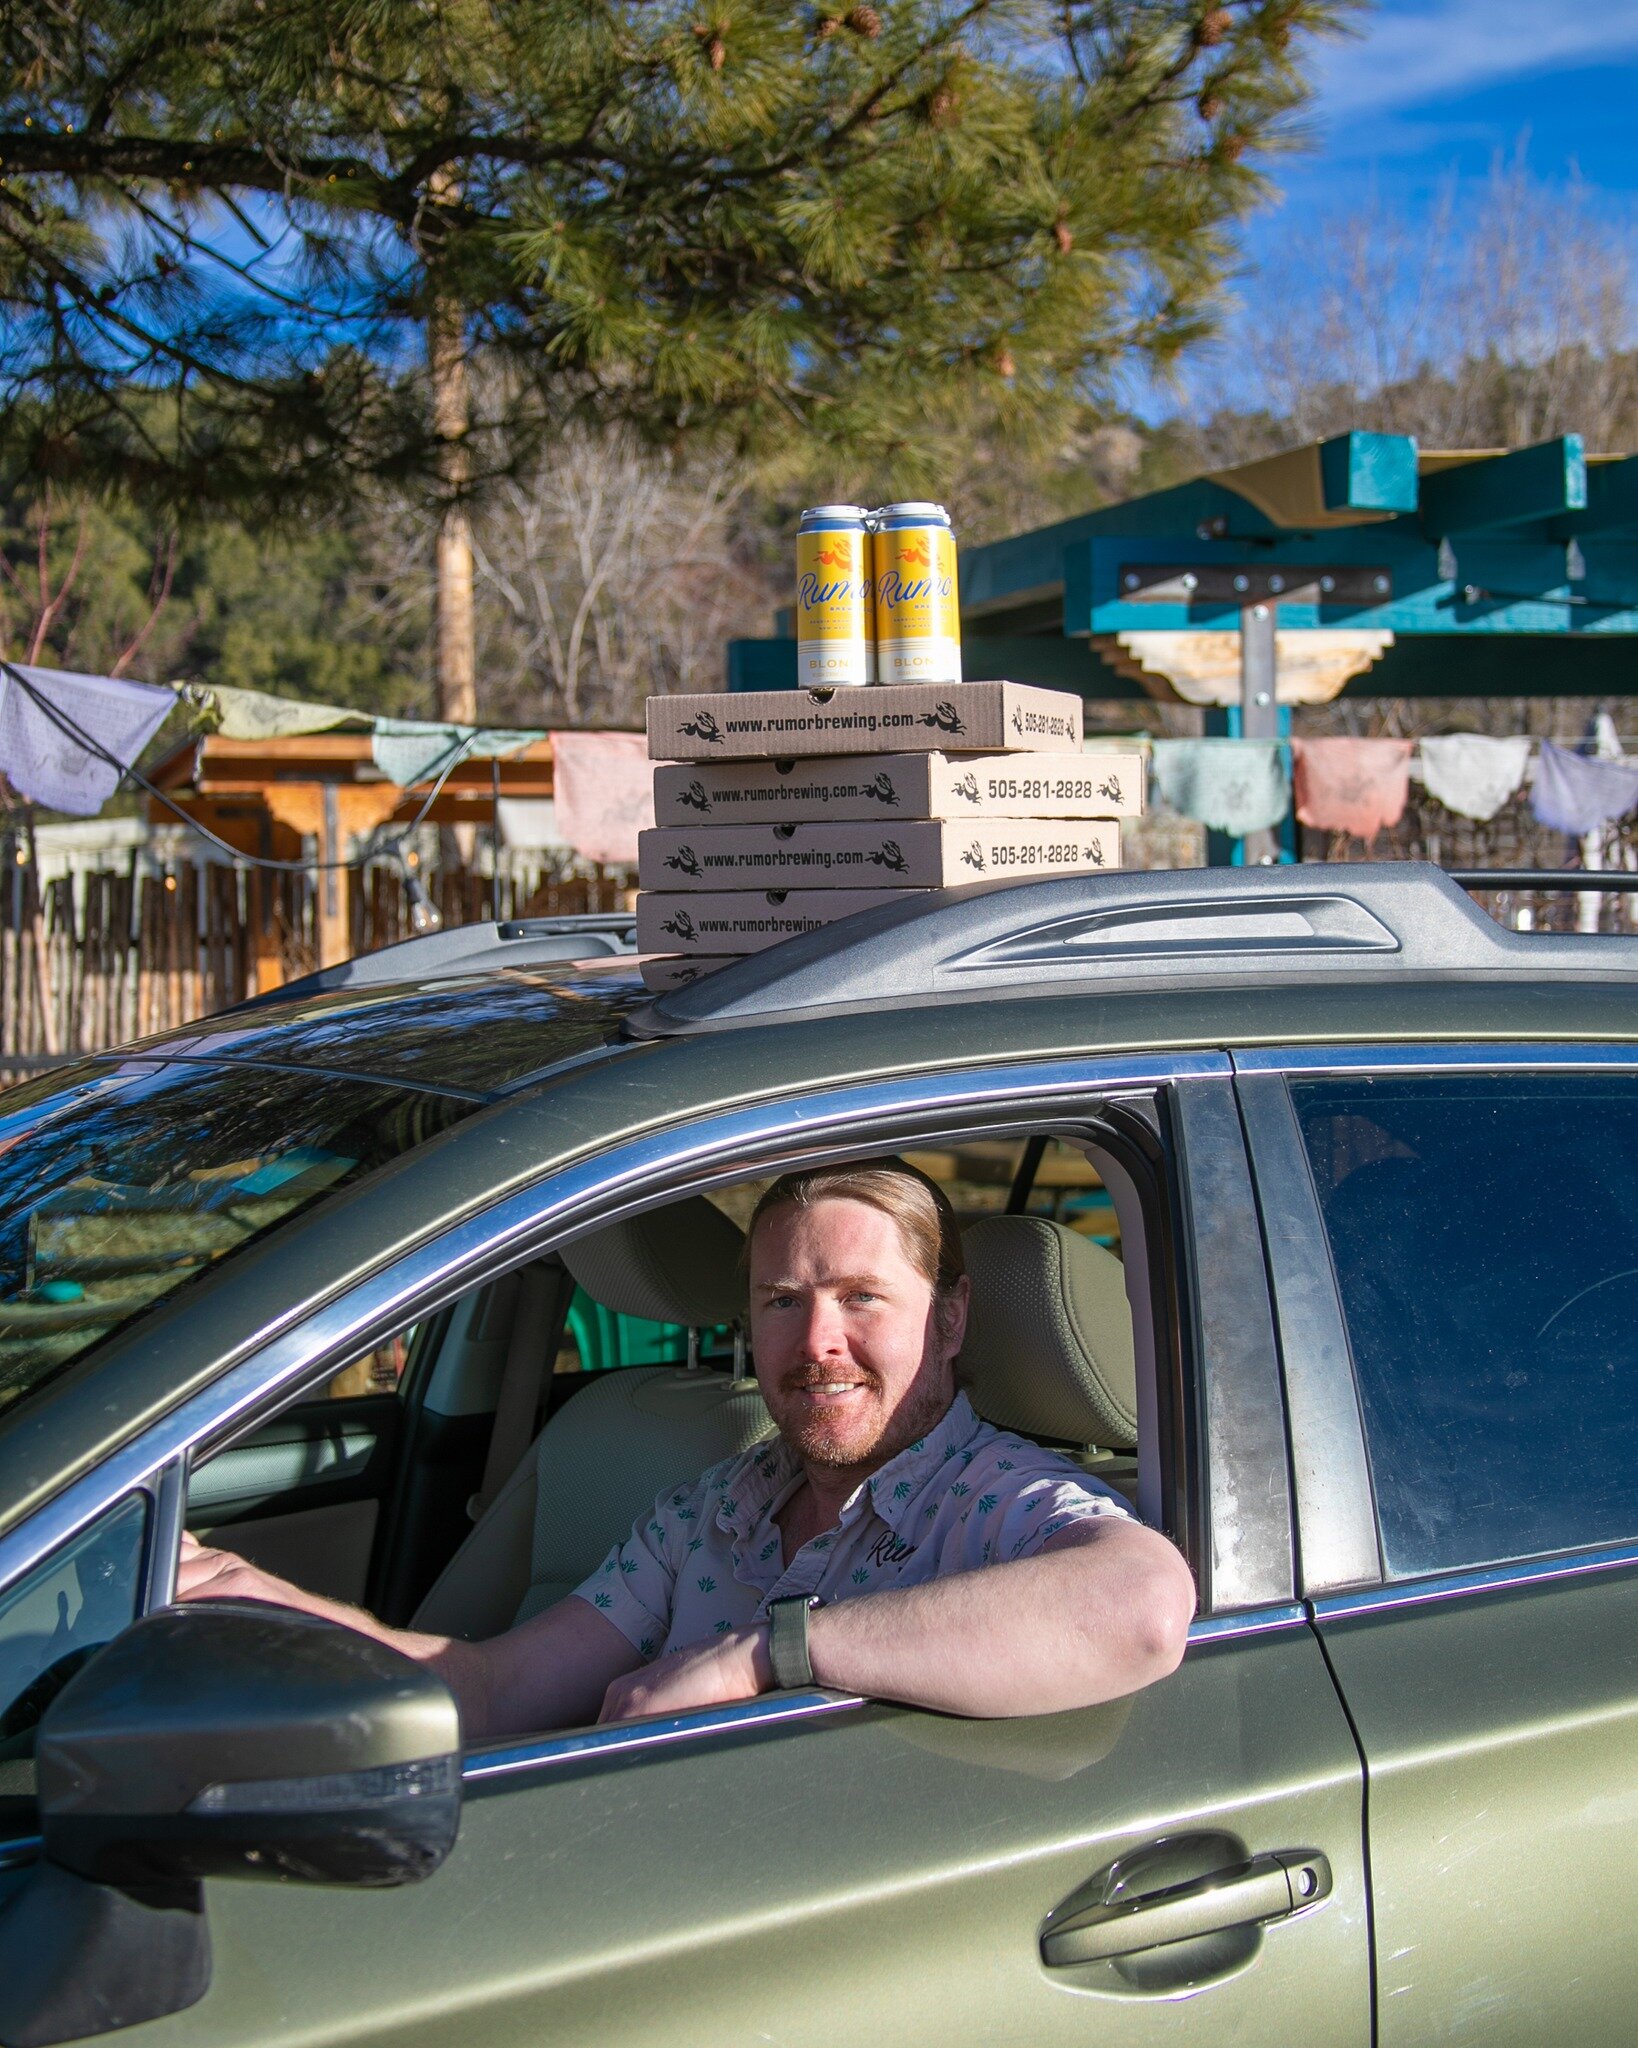 Introducing our new delivery option!
Don't forget the pizza on the roof of that car, Patrick!
Delivery slots open at 8am for the day starting Thursday February 15th.

#pizzadeliver #newmexicofood #visitabq #newmexicobrewery #nmbrew #newmexicooutside 